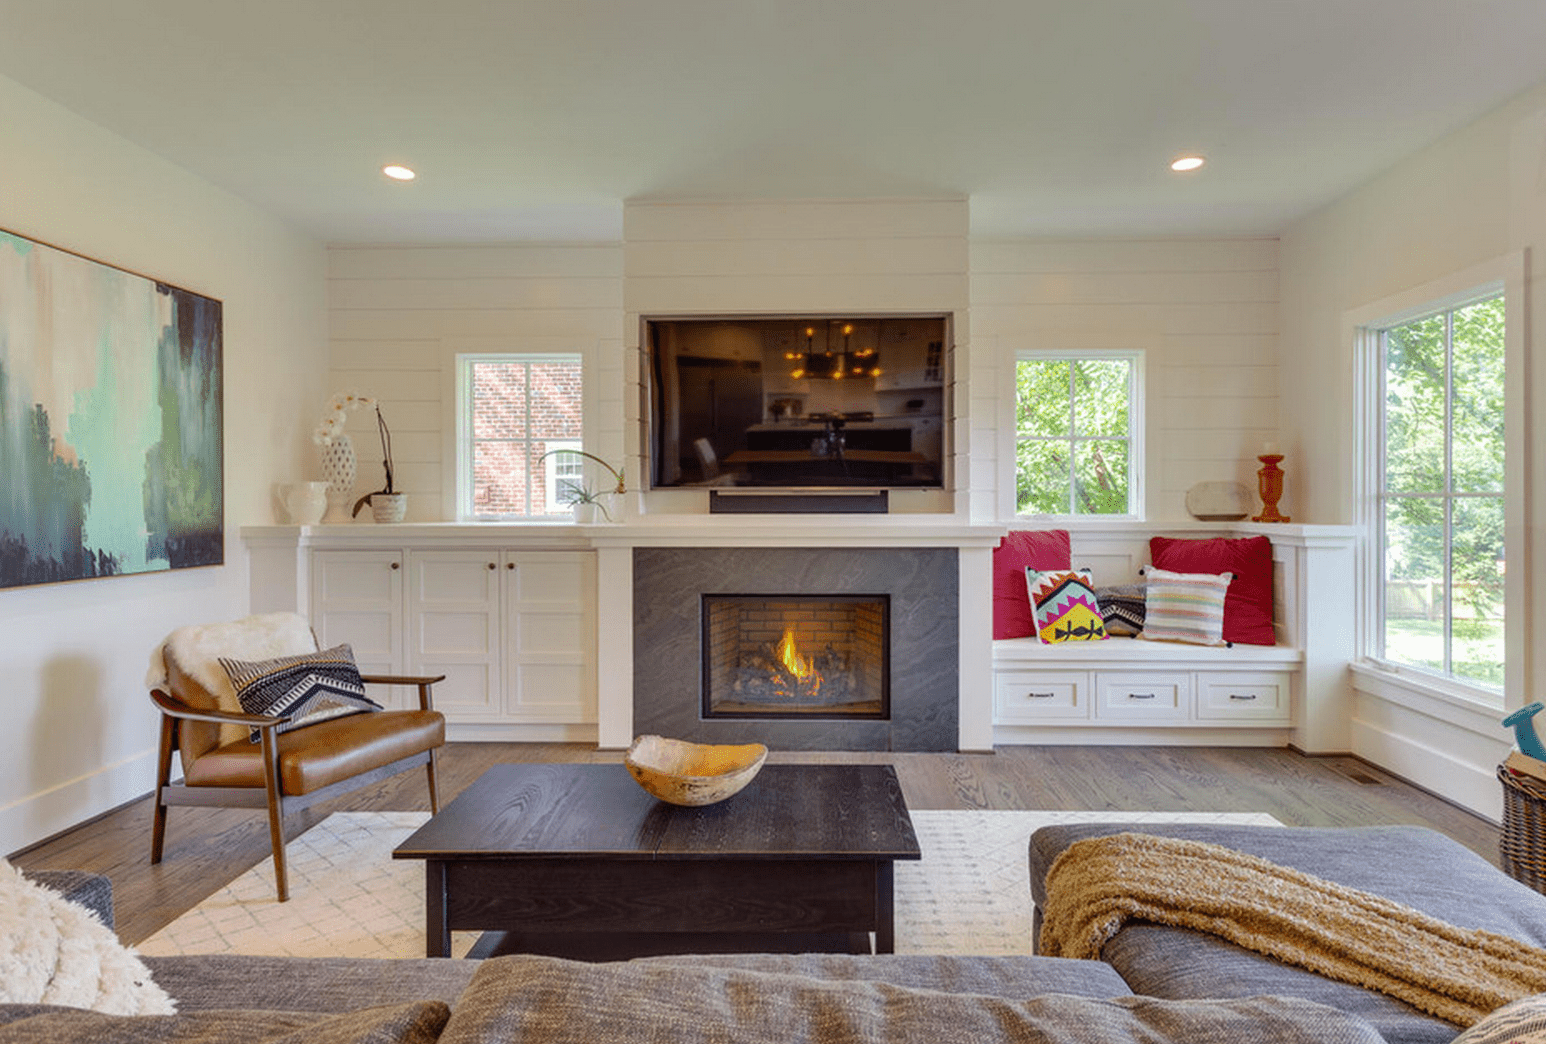 Fireplace with Windows On Both Sides Fresh Beautiful Living Rooms with Built In Shelving